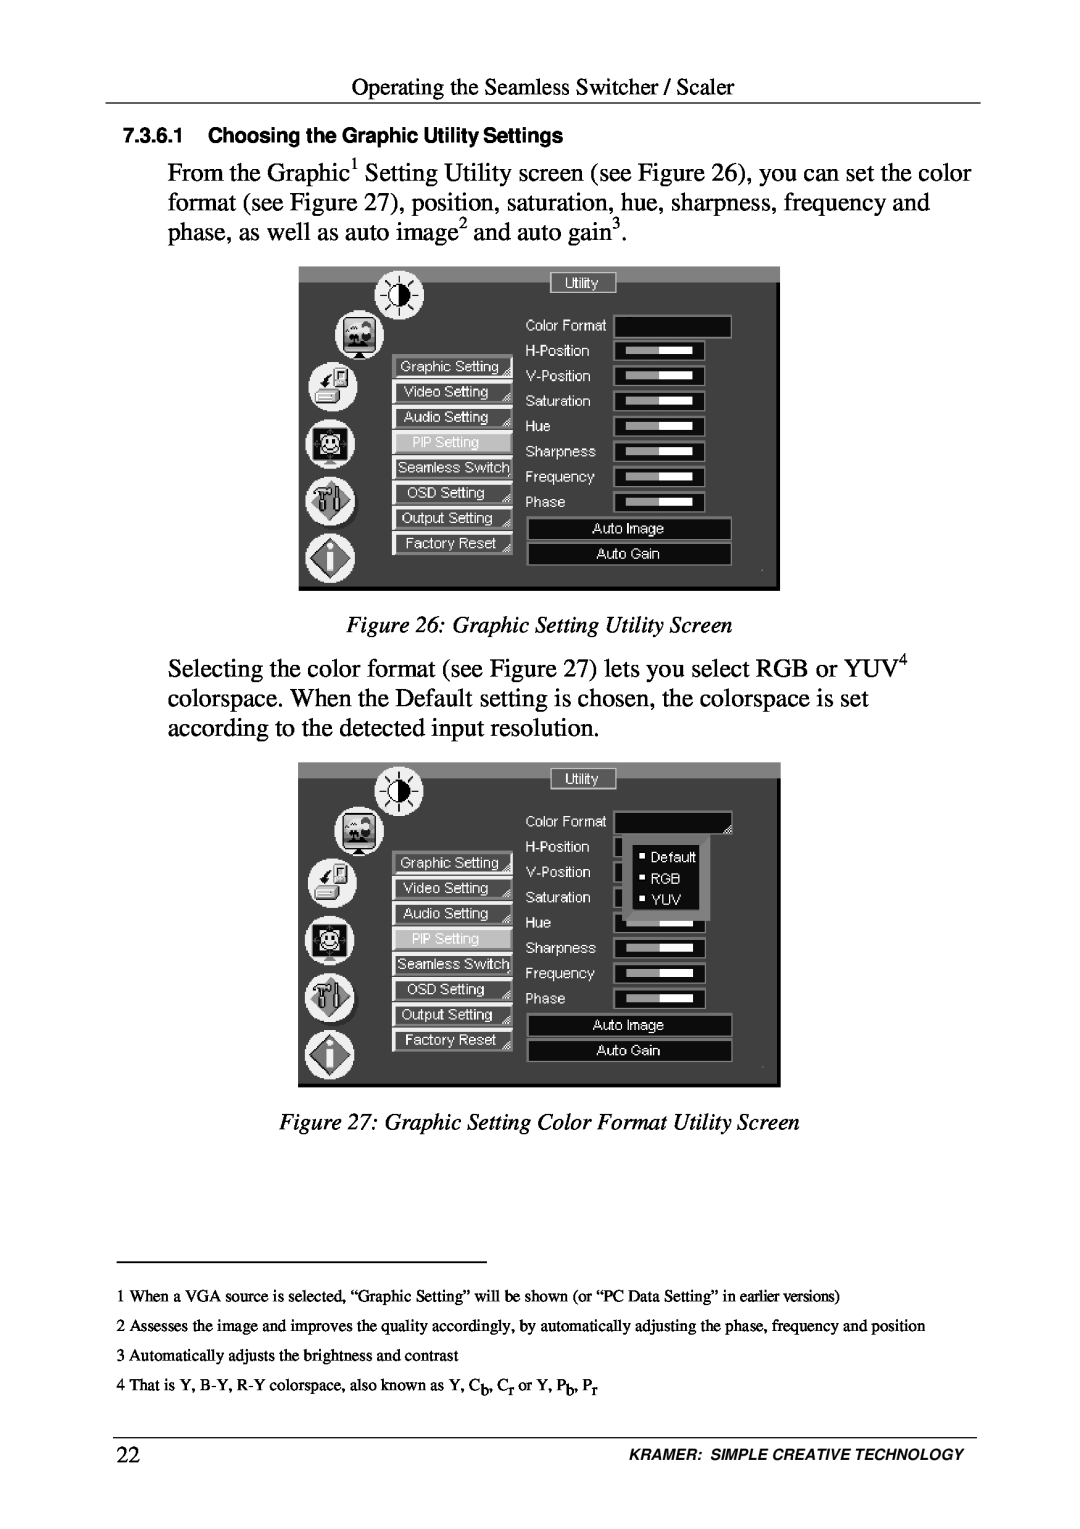 Kramer Electronics VP-719DS user manual Graphic Setting Utility Screen, 7.3.6.1Choosing the Graphic Utility Settings 